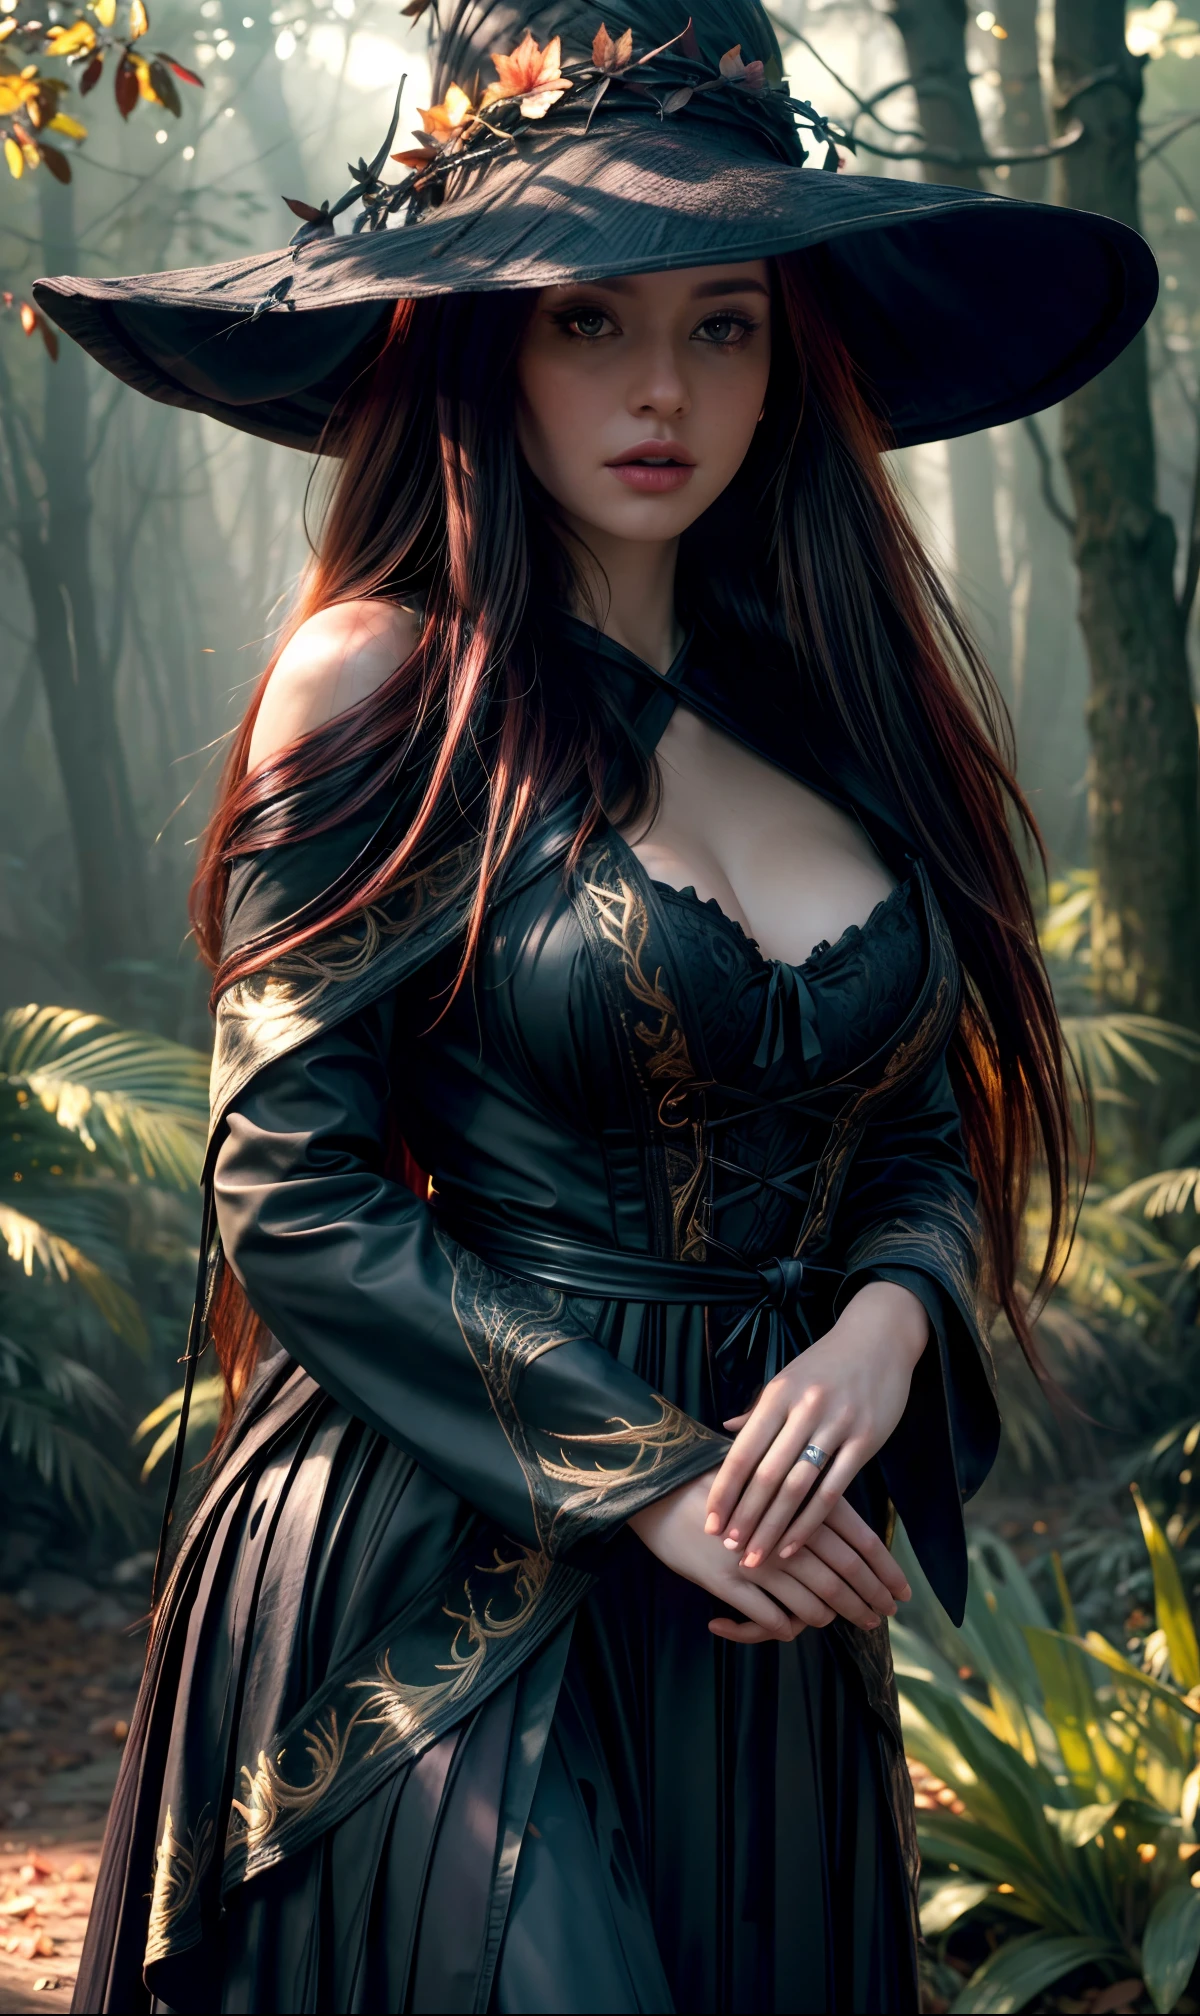 A forest witch detailed beautiful(The forest witch should have a wild, untamed appearance, with long, flowing hair and dark, piercing eyes. Her clothing should be made of natural materials, such as animal skins or leaves, and adorned with symbols of nature and magic), a full moon glowing behind her., The surrounding forest should be dense and mysterious, with gnarled trees and twisting vines that seem to reach out and grasp at the witch, masterpiece, high detailed face, Global illumination, real hair movement, best quality, Sharp Focus, (32k resolution, UHD, HDR)(Kodak gold 200, Portra 400, fujifilm superia), Canon R3,Hasselblad,IMAX, (Canon EF70-200mm f2.8 IS III USM) ((prominent heavy shadows)) (lunar ray time) (octane render:0.), vibrant colors, soft lighting, natural light, photo realistic, photorealism, 8k, RAW photo, highest quality, masterpiece, ultra-high resolution